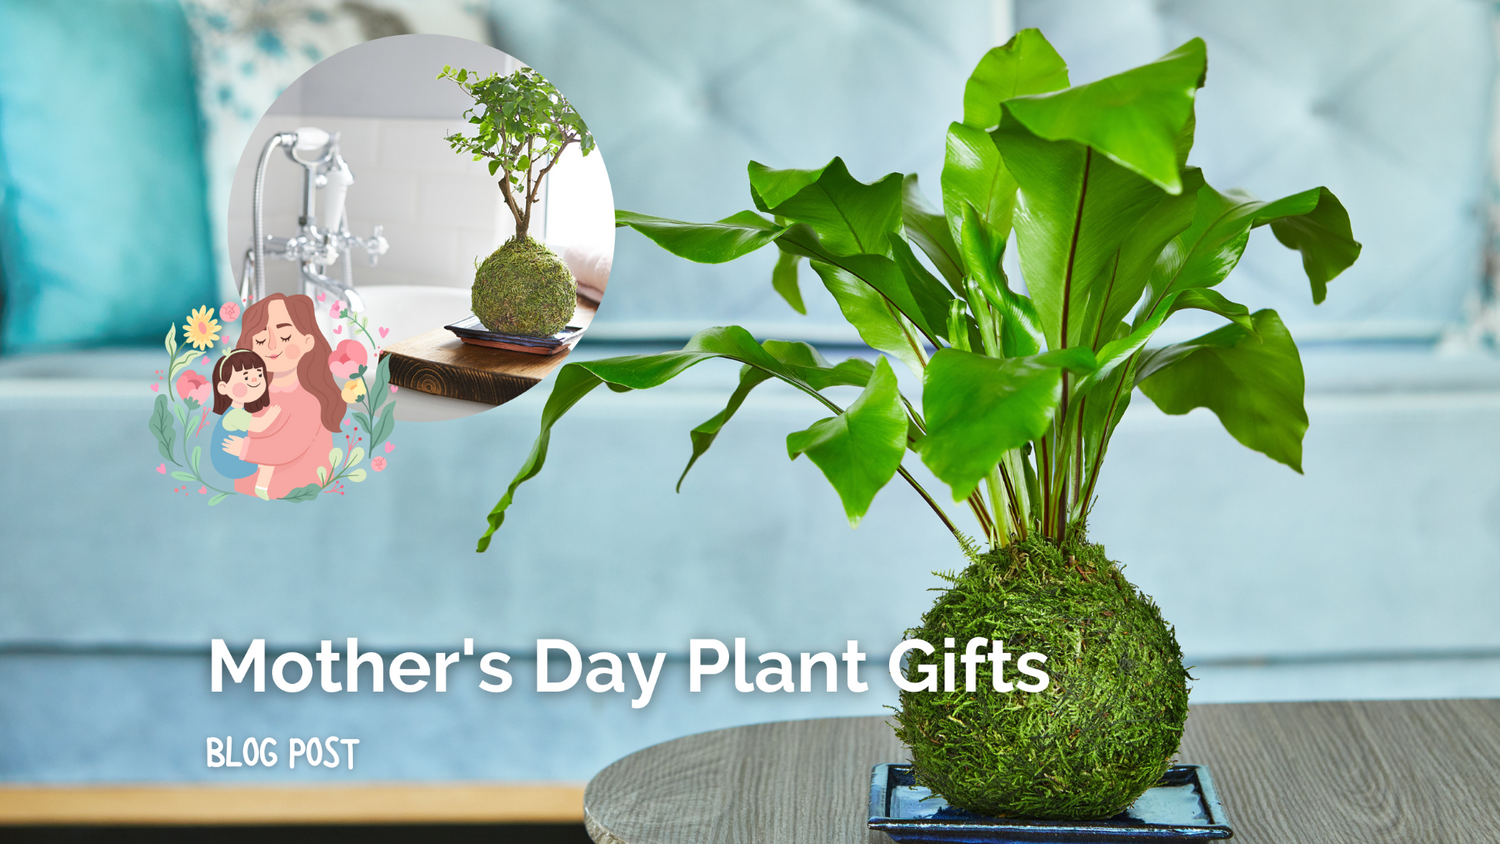 A Memorable Mother’s Day Gift: Little Plant to Big Plant